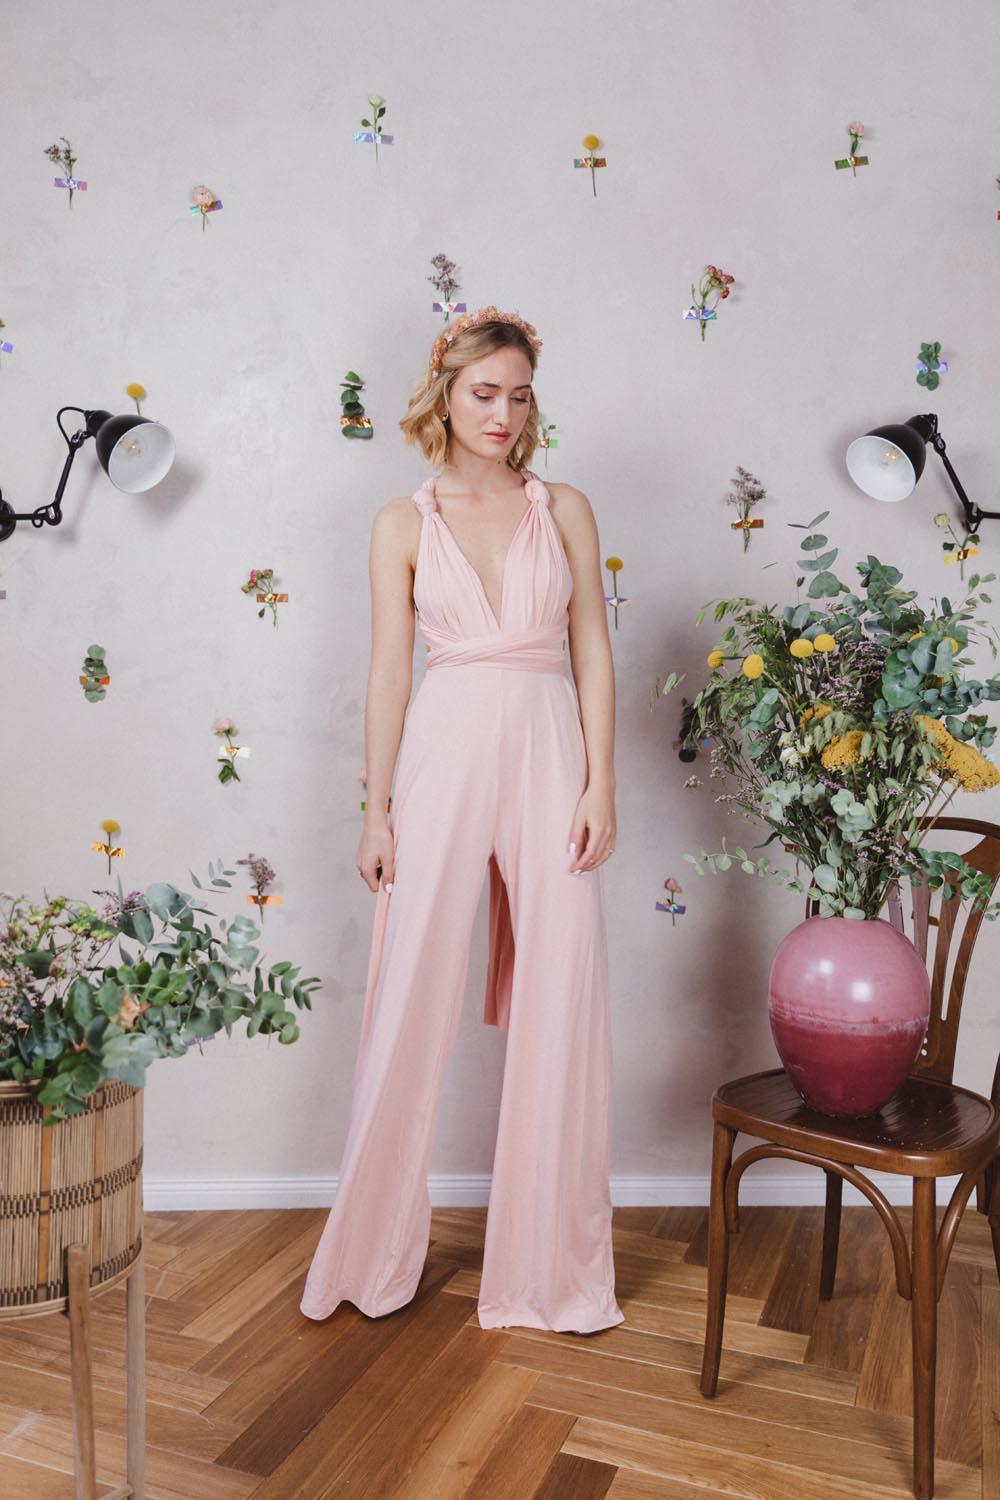 Stylish and Versatile Jumpsuits for Every Occasion